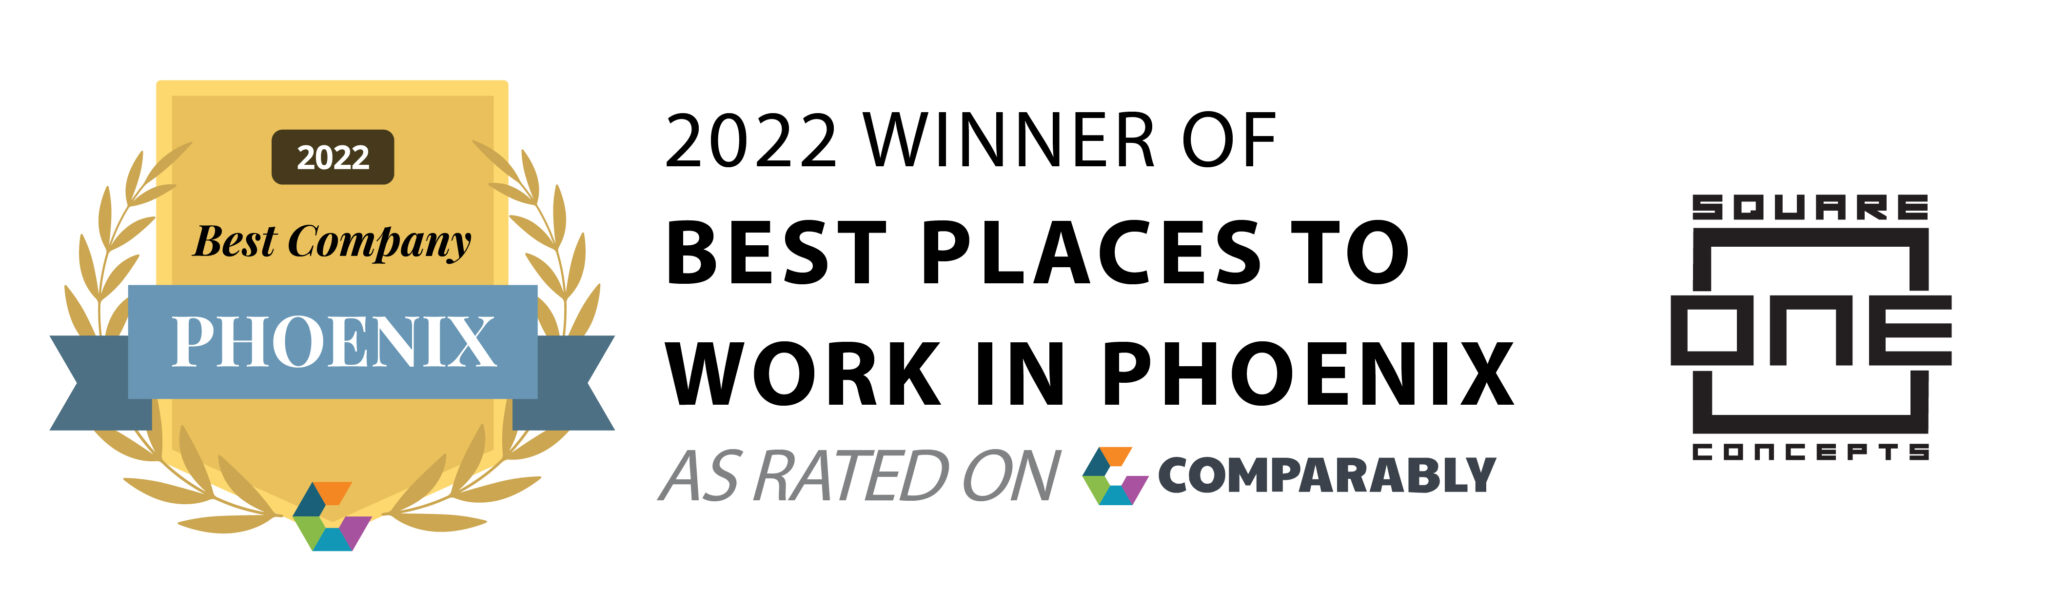 Square One Concepts, Inc. is a Winner of Comparably’s Best Leadership Teams 2021. Check out our award winning company culture as rated by our own employees  #comparably